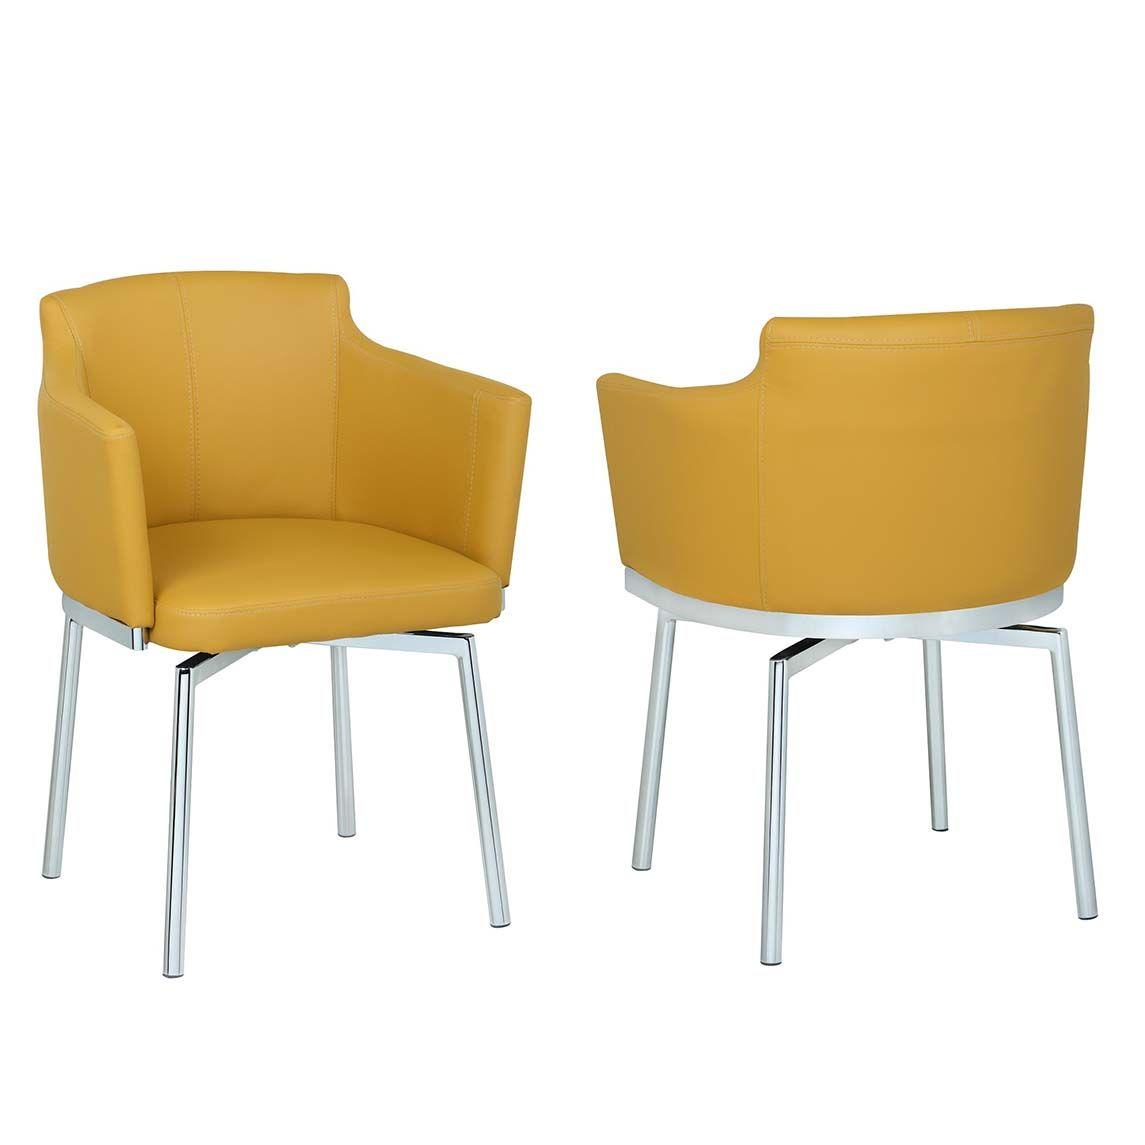 Modern Dining Chair Set Dusty DUSTY-AC-MUS-KD-Set-2 in Yellow Eco Leather